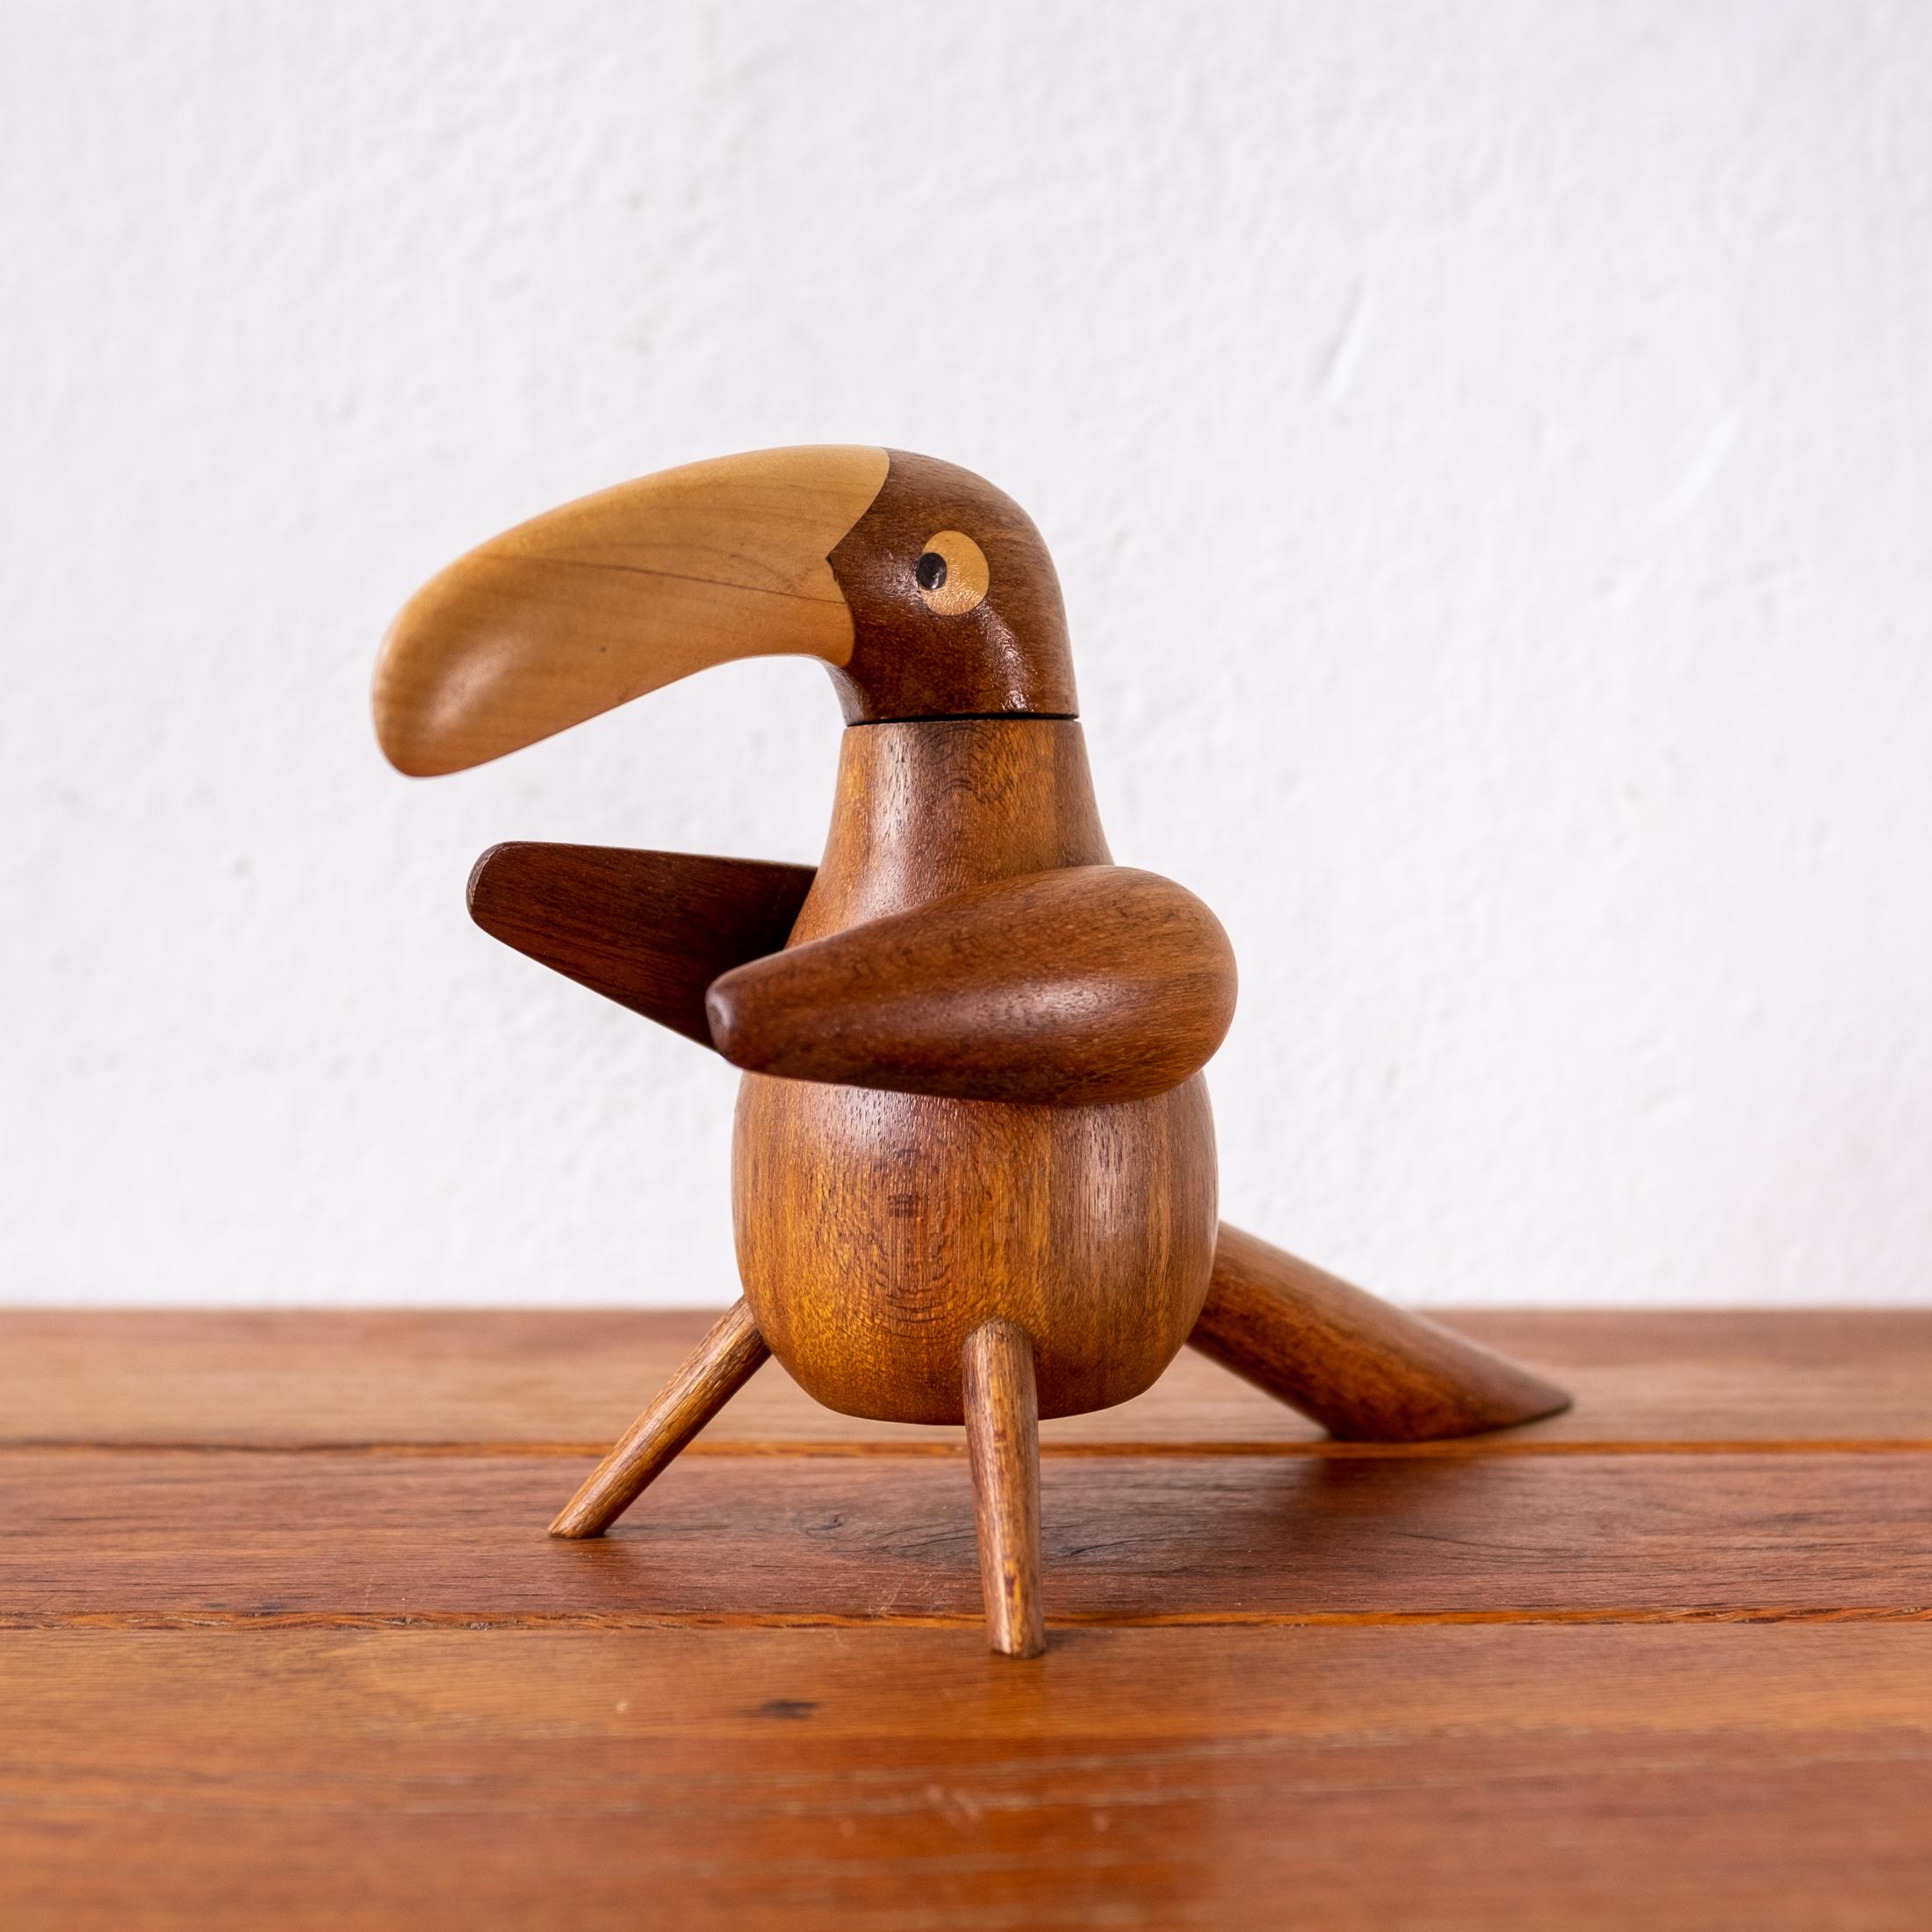 Toucan Pepper Mill by Sven Erik Tonn-Petersen (1925- 2004). The arm is removed to fill with pepper corns or other spices. Mixed wood with teak and birch. Made in Denmark.